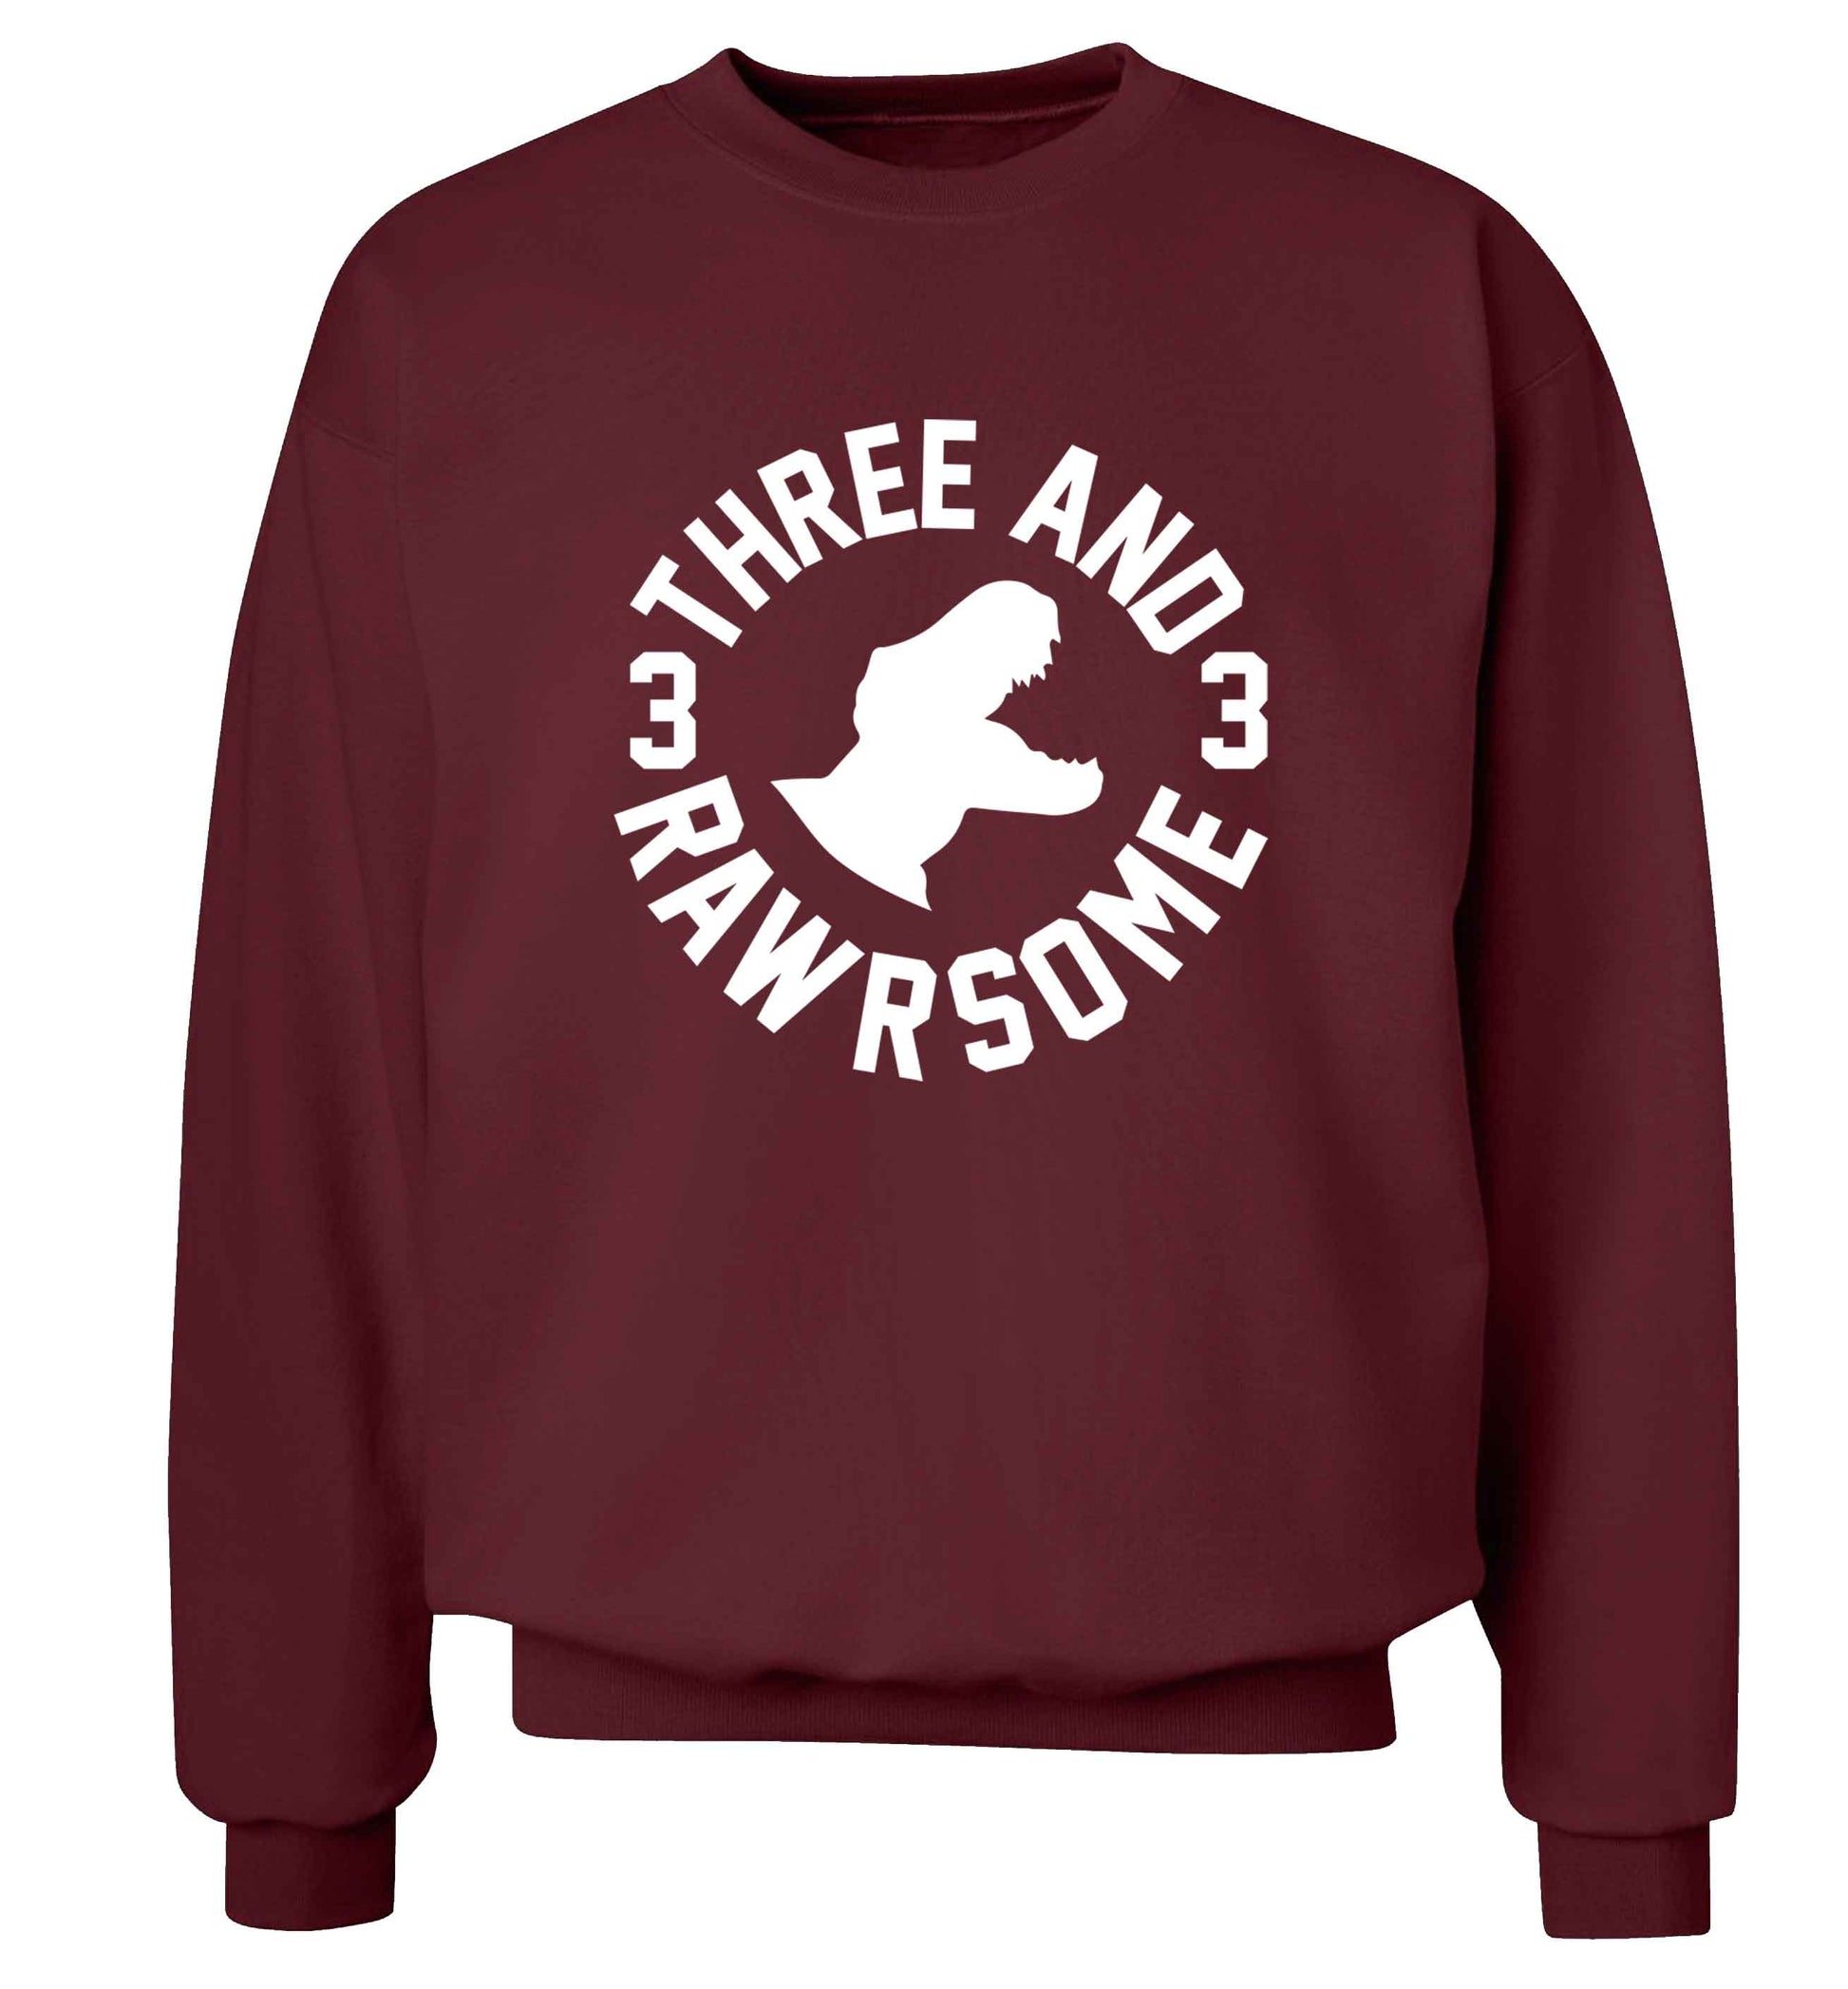 Three and rawrsome adult's unisex maroon sweater 2XL